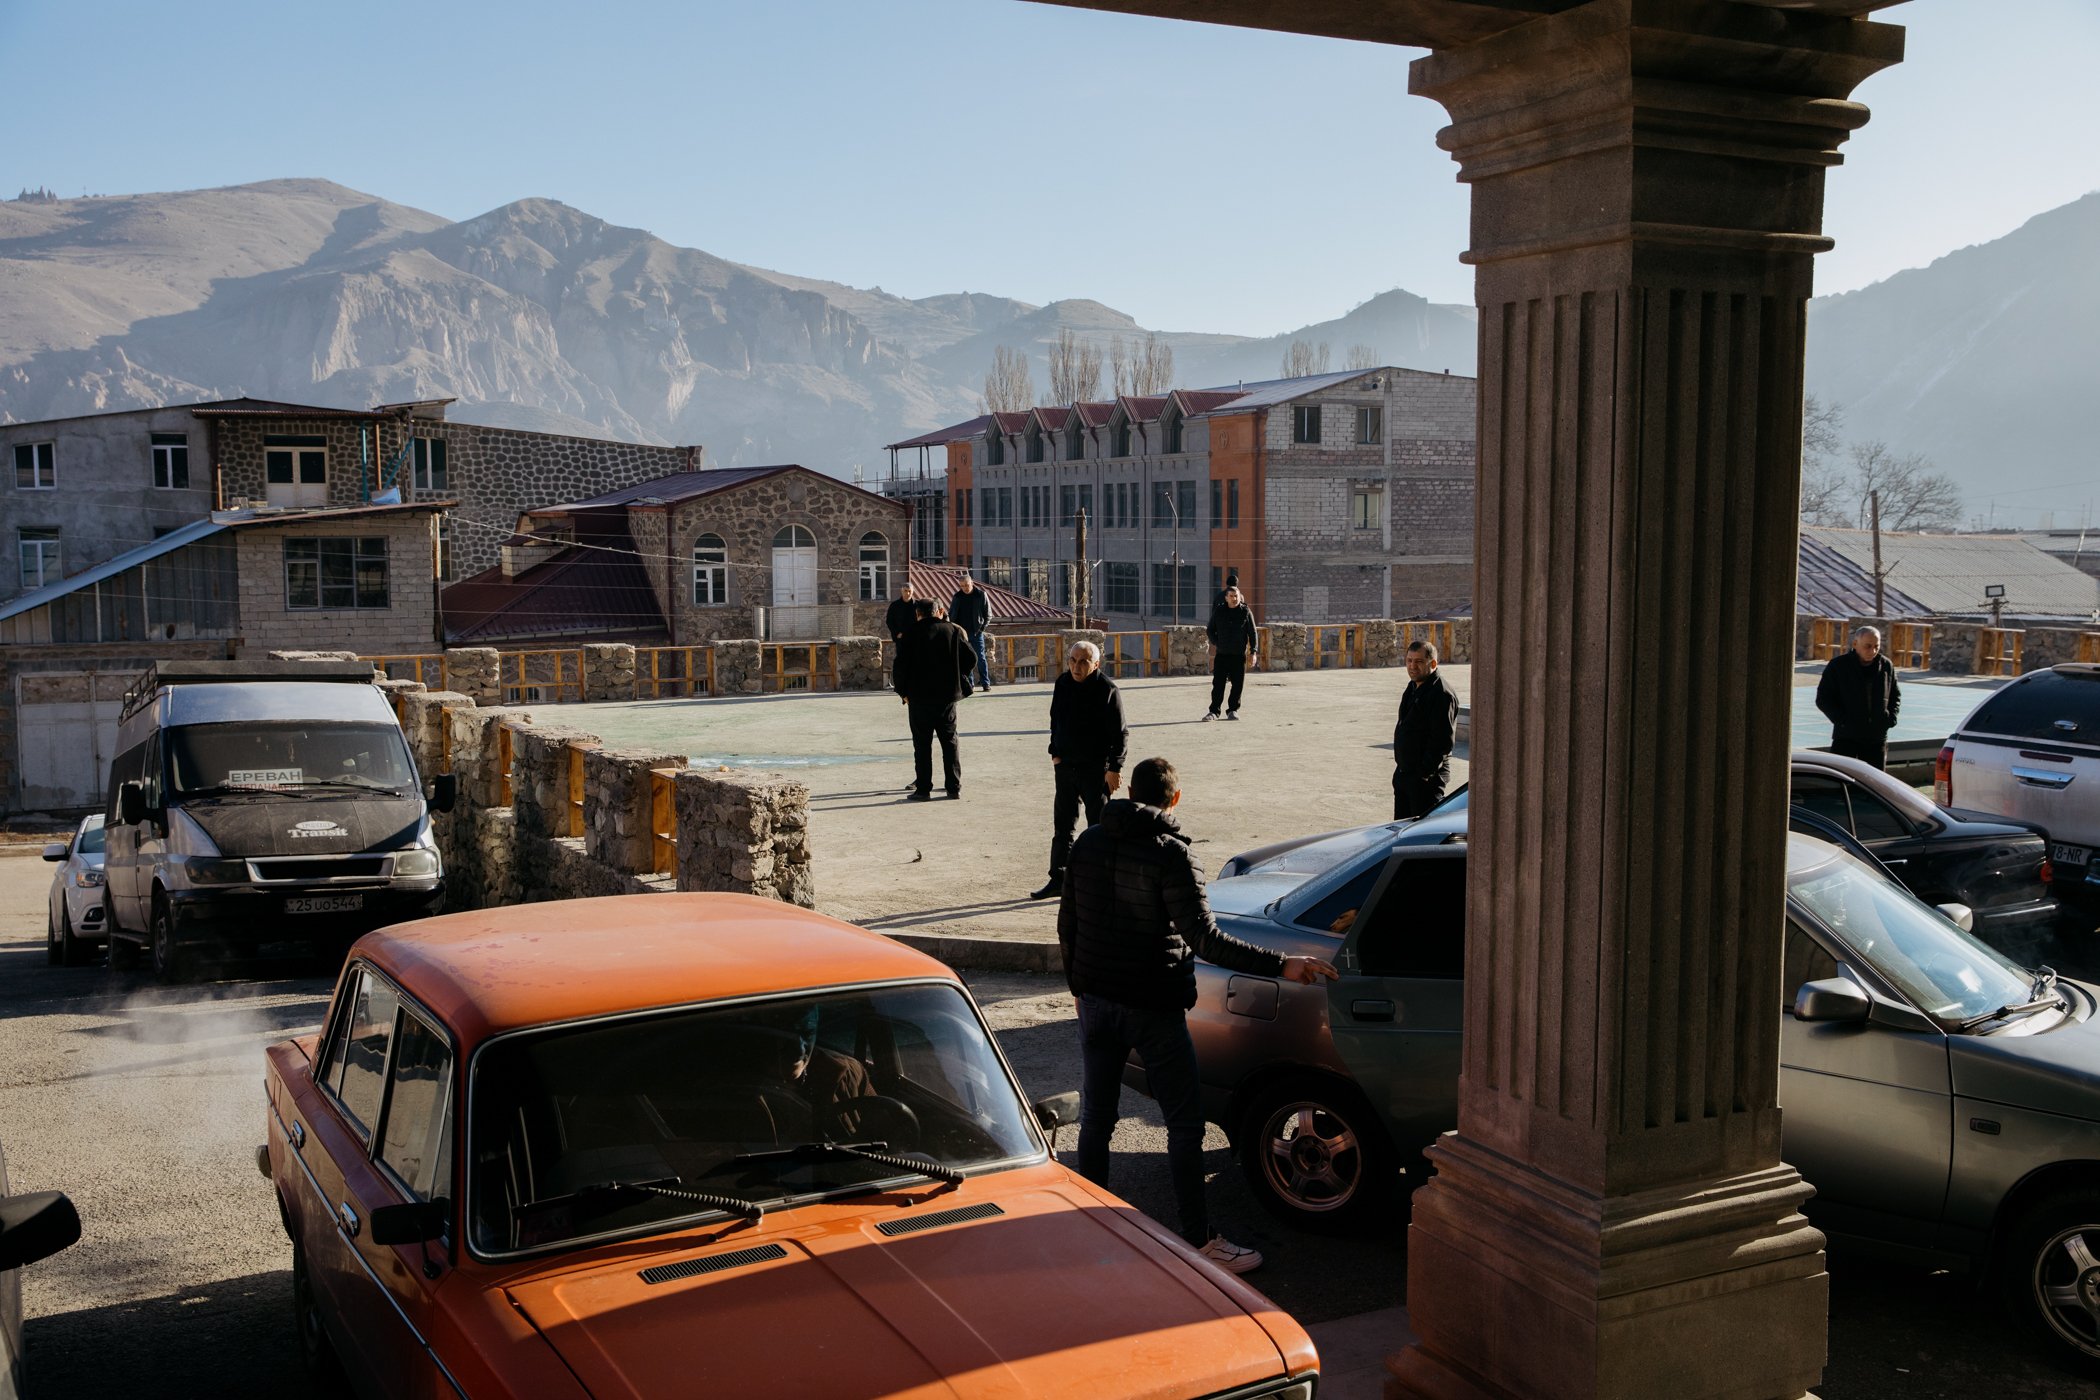  Guests at the Hotel Goris stand outside to smoke. 